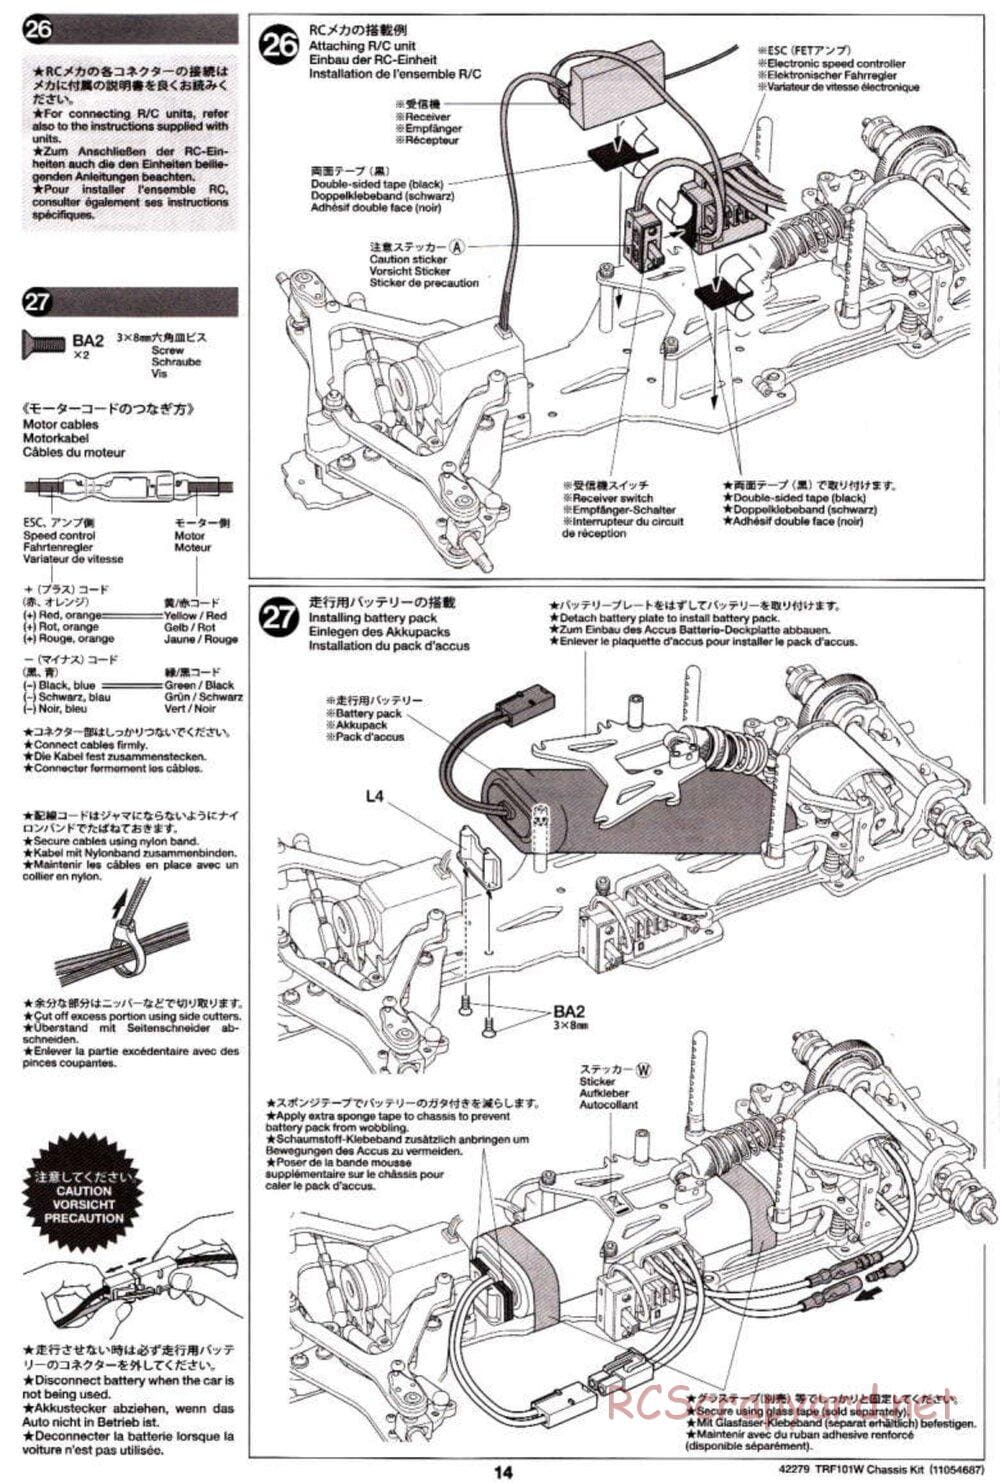 Tamiya - TRF101W Chassis Chassis - Manual - Page 14